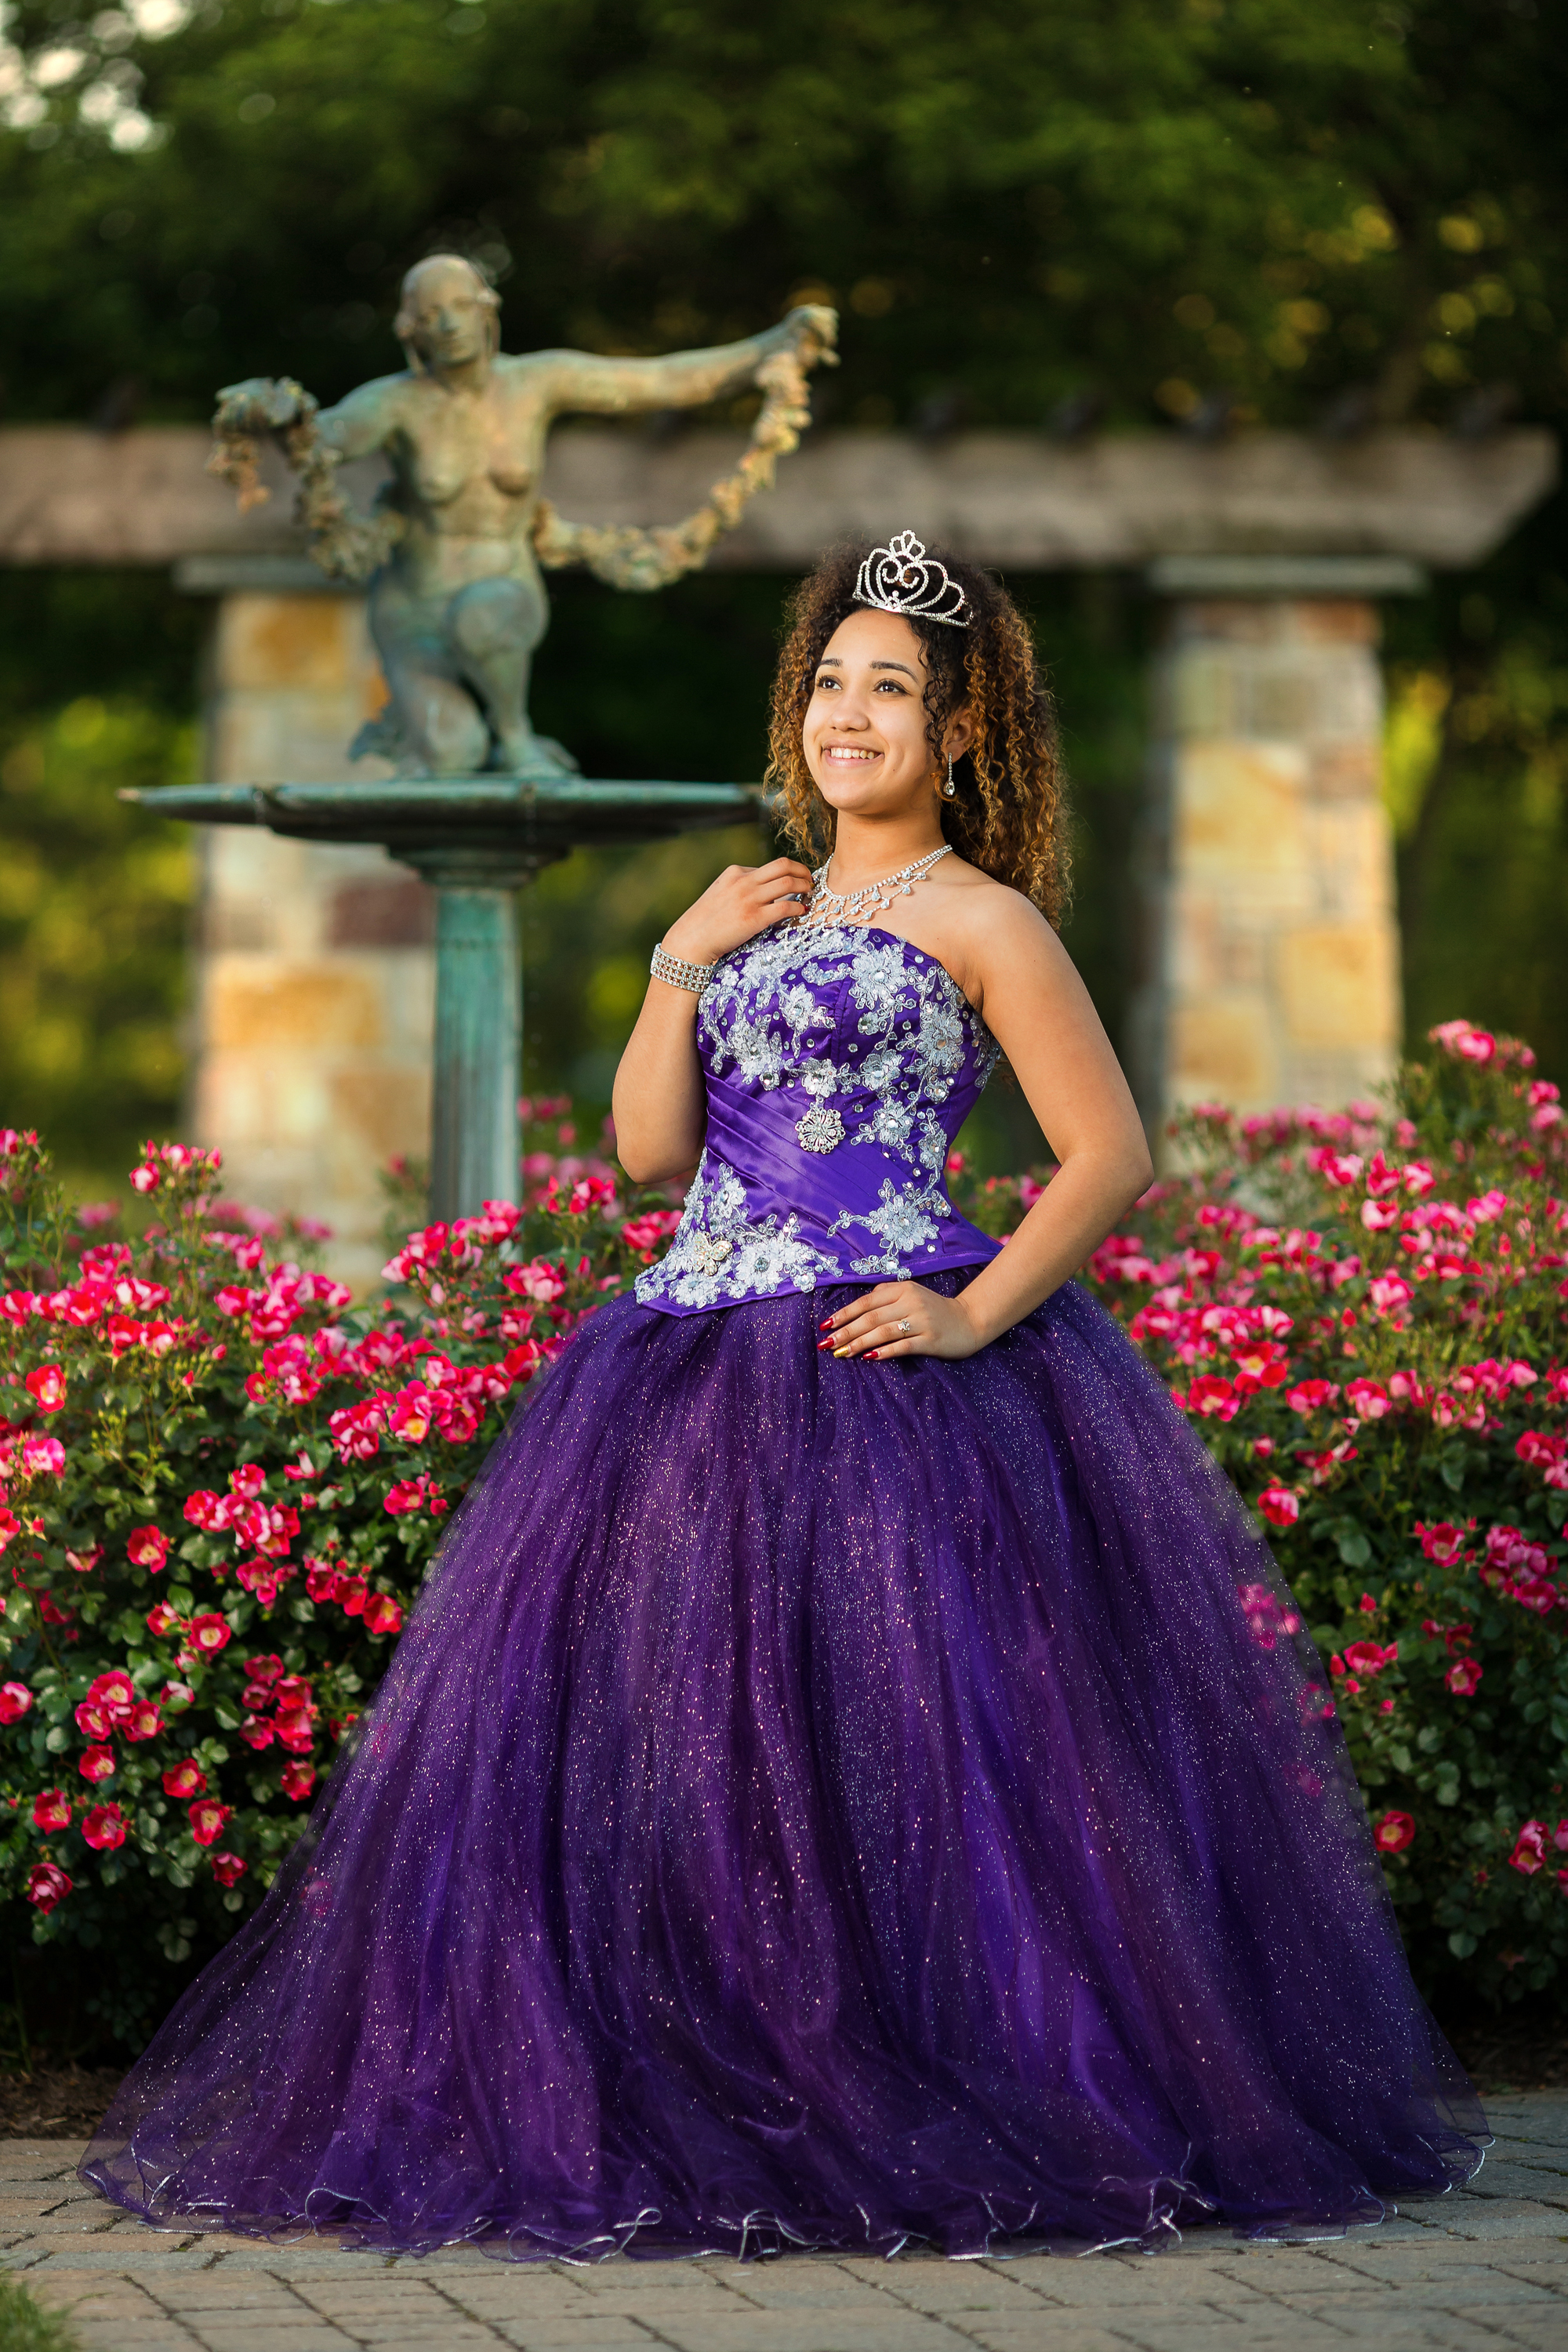 Natalias-Quince-Session-Garcia-Photography-2240.jpg